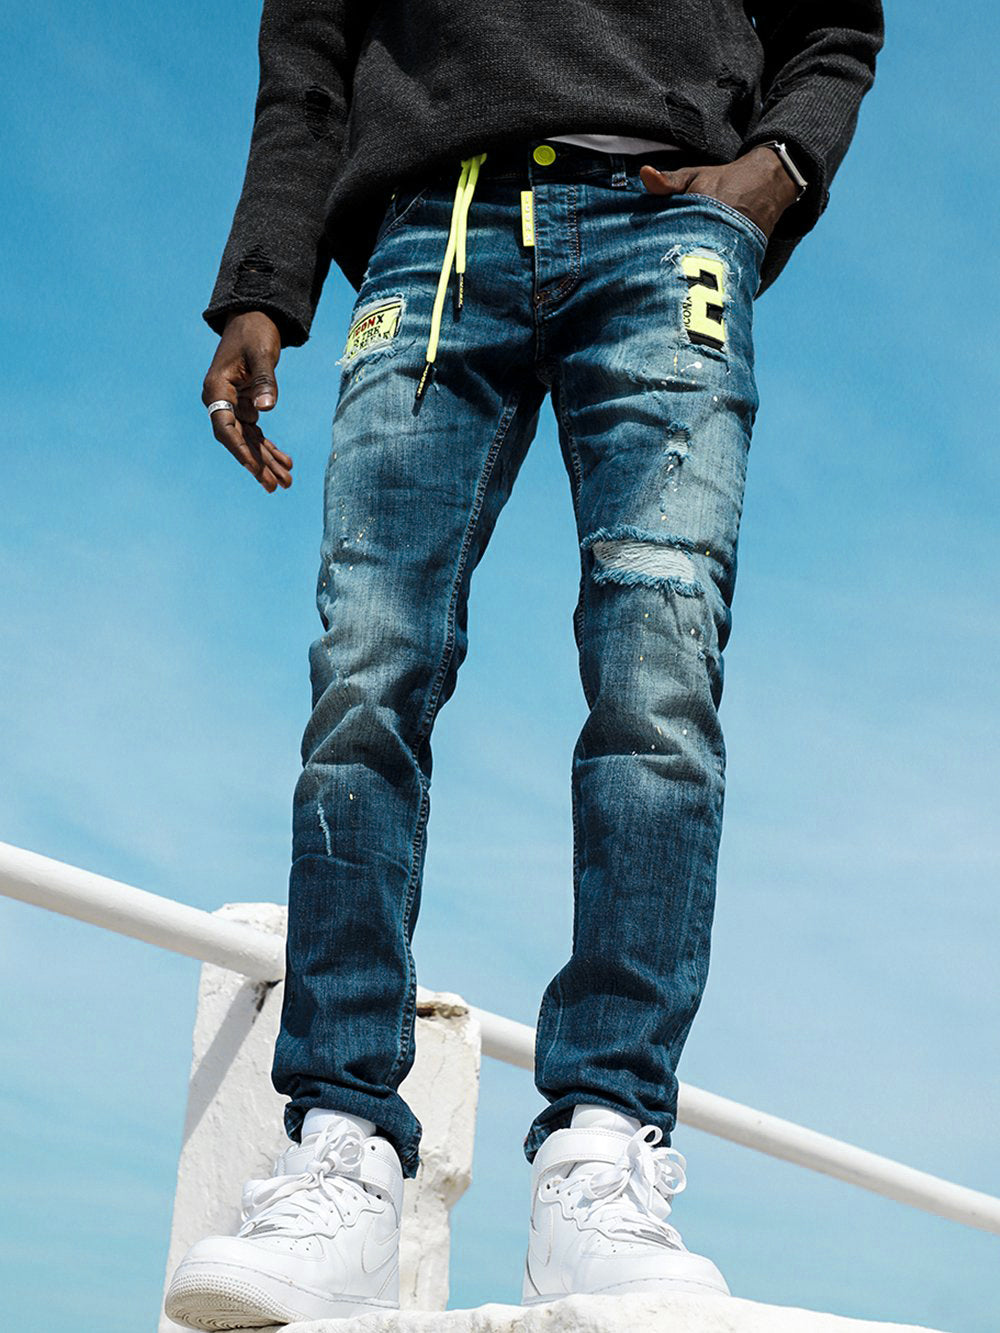 A man is standing on a ledge wearing PHOSPHORUS jeans and sneakers.